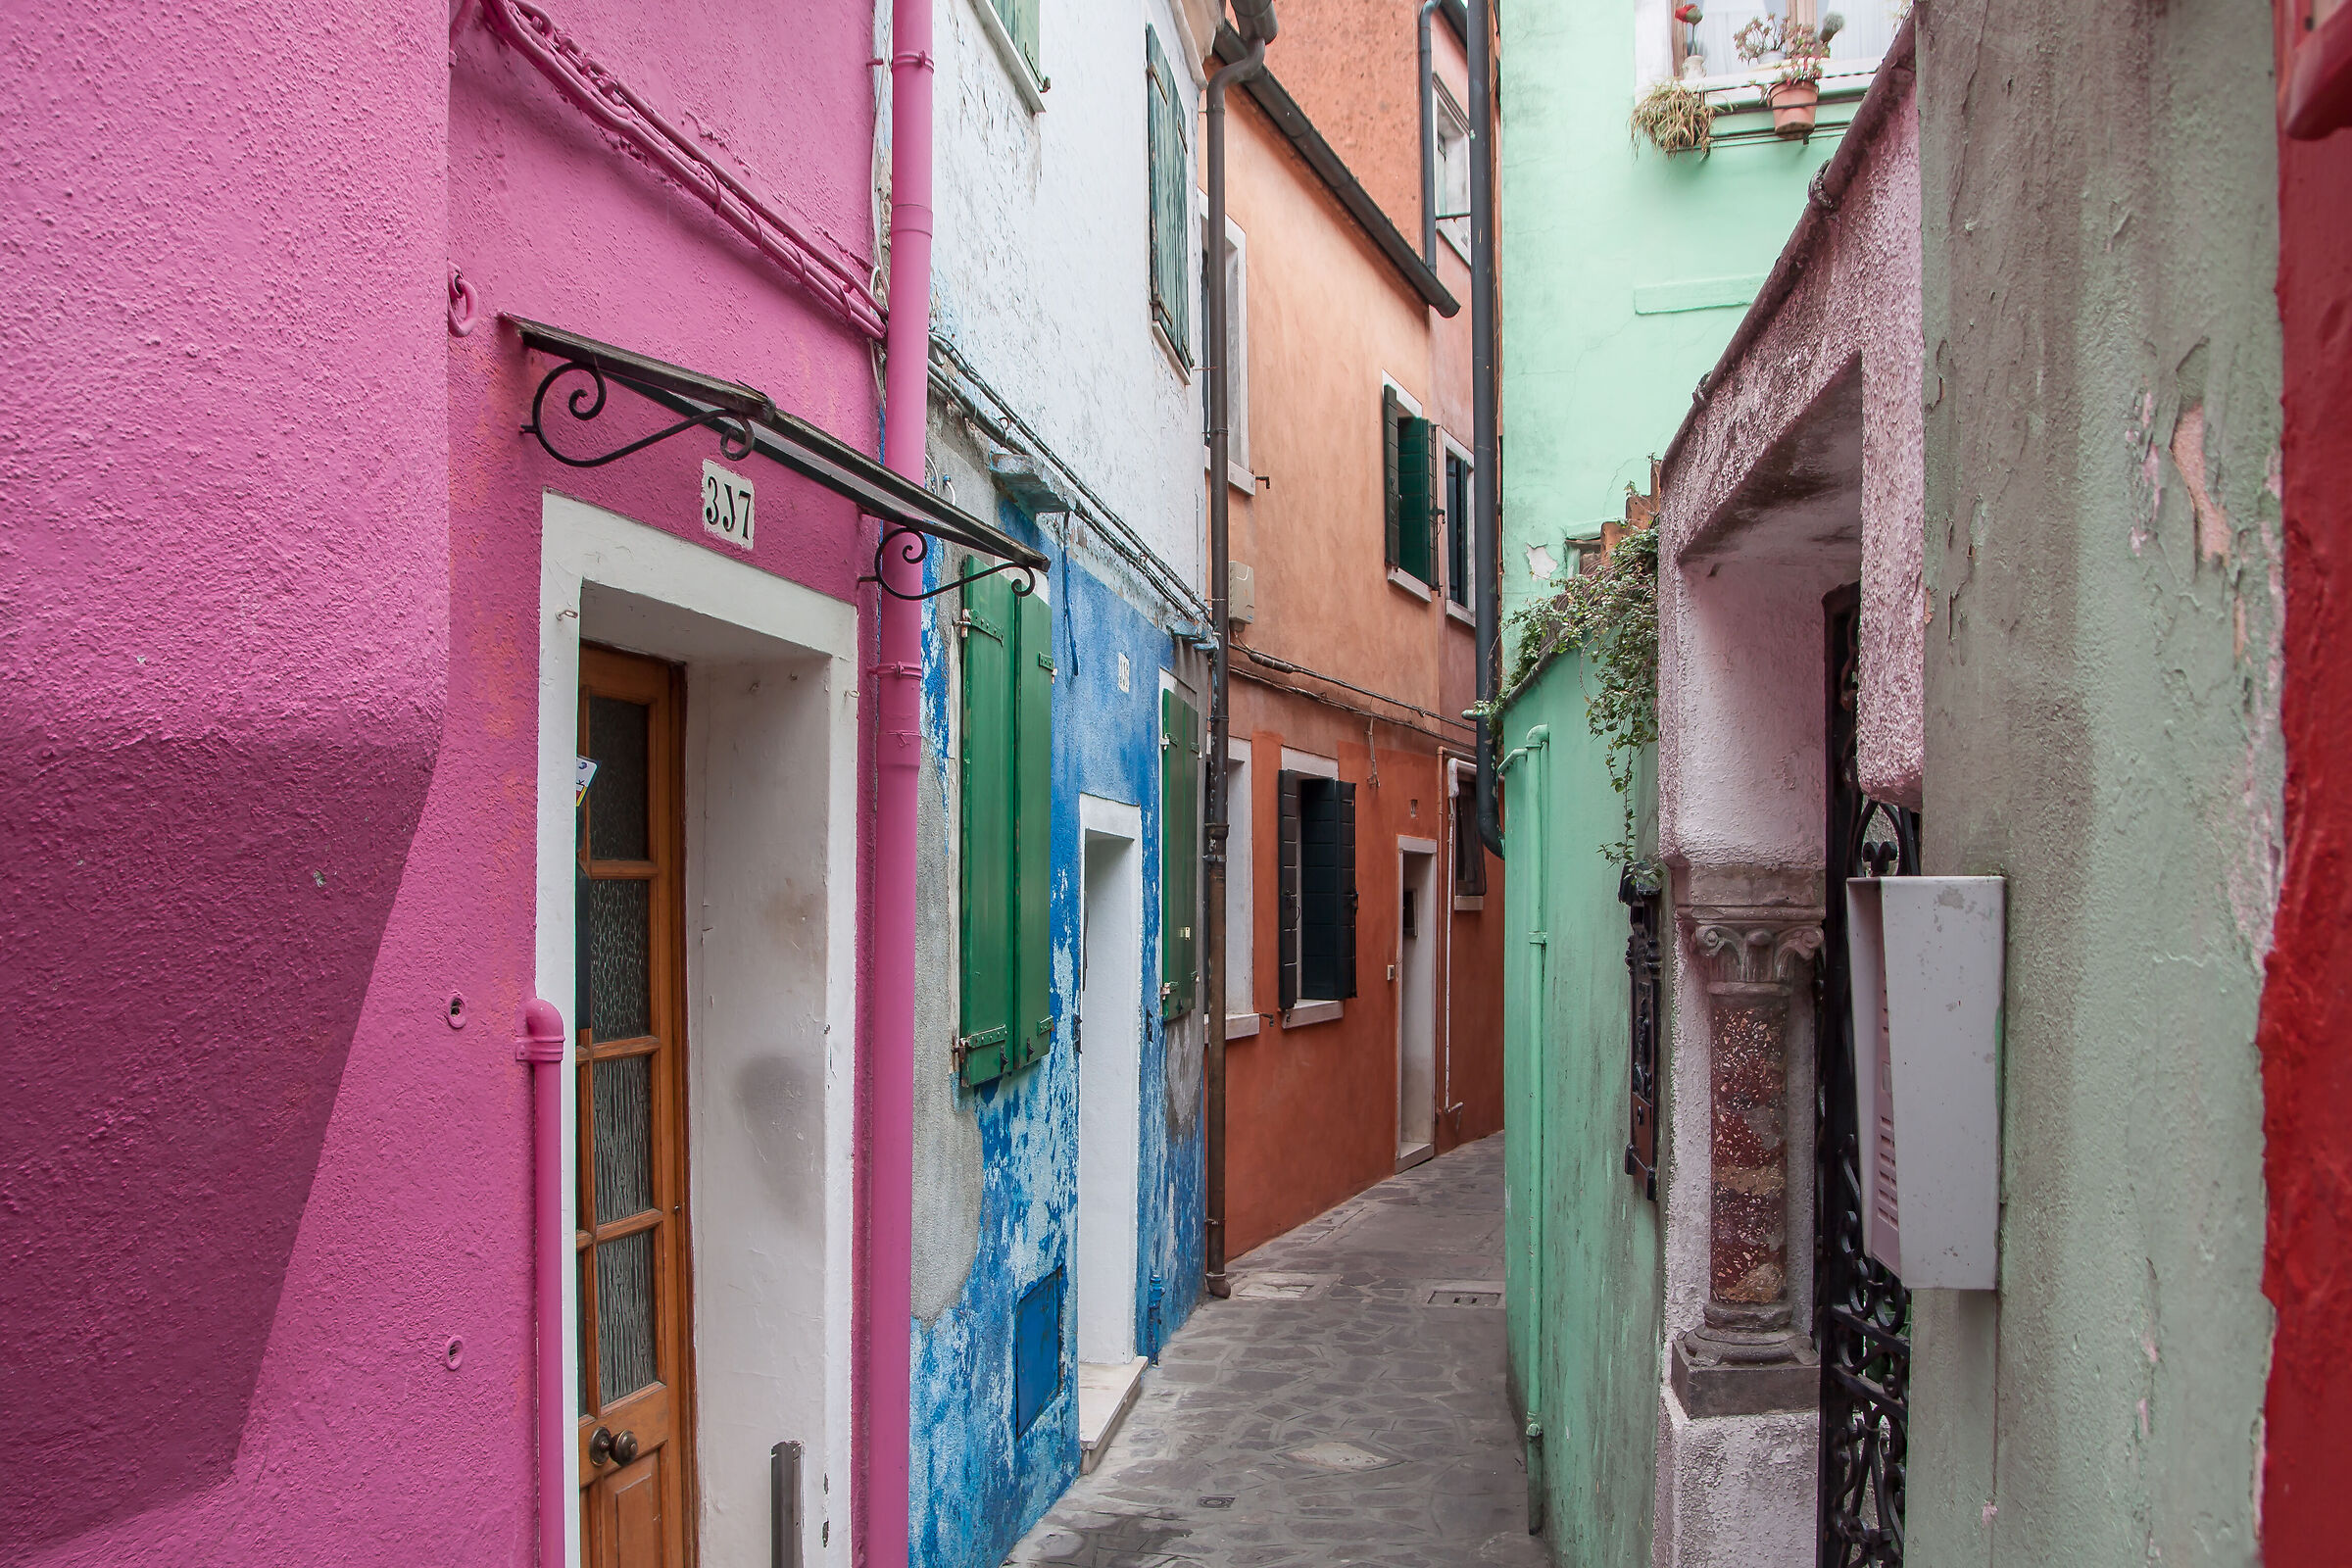 Narrow streets and magical colors....